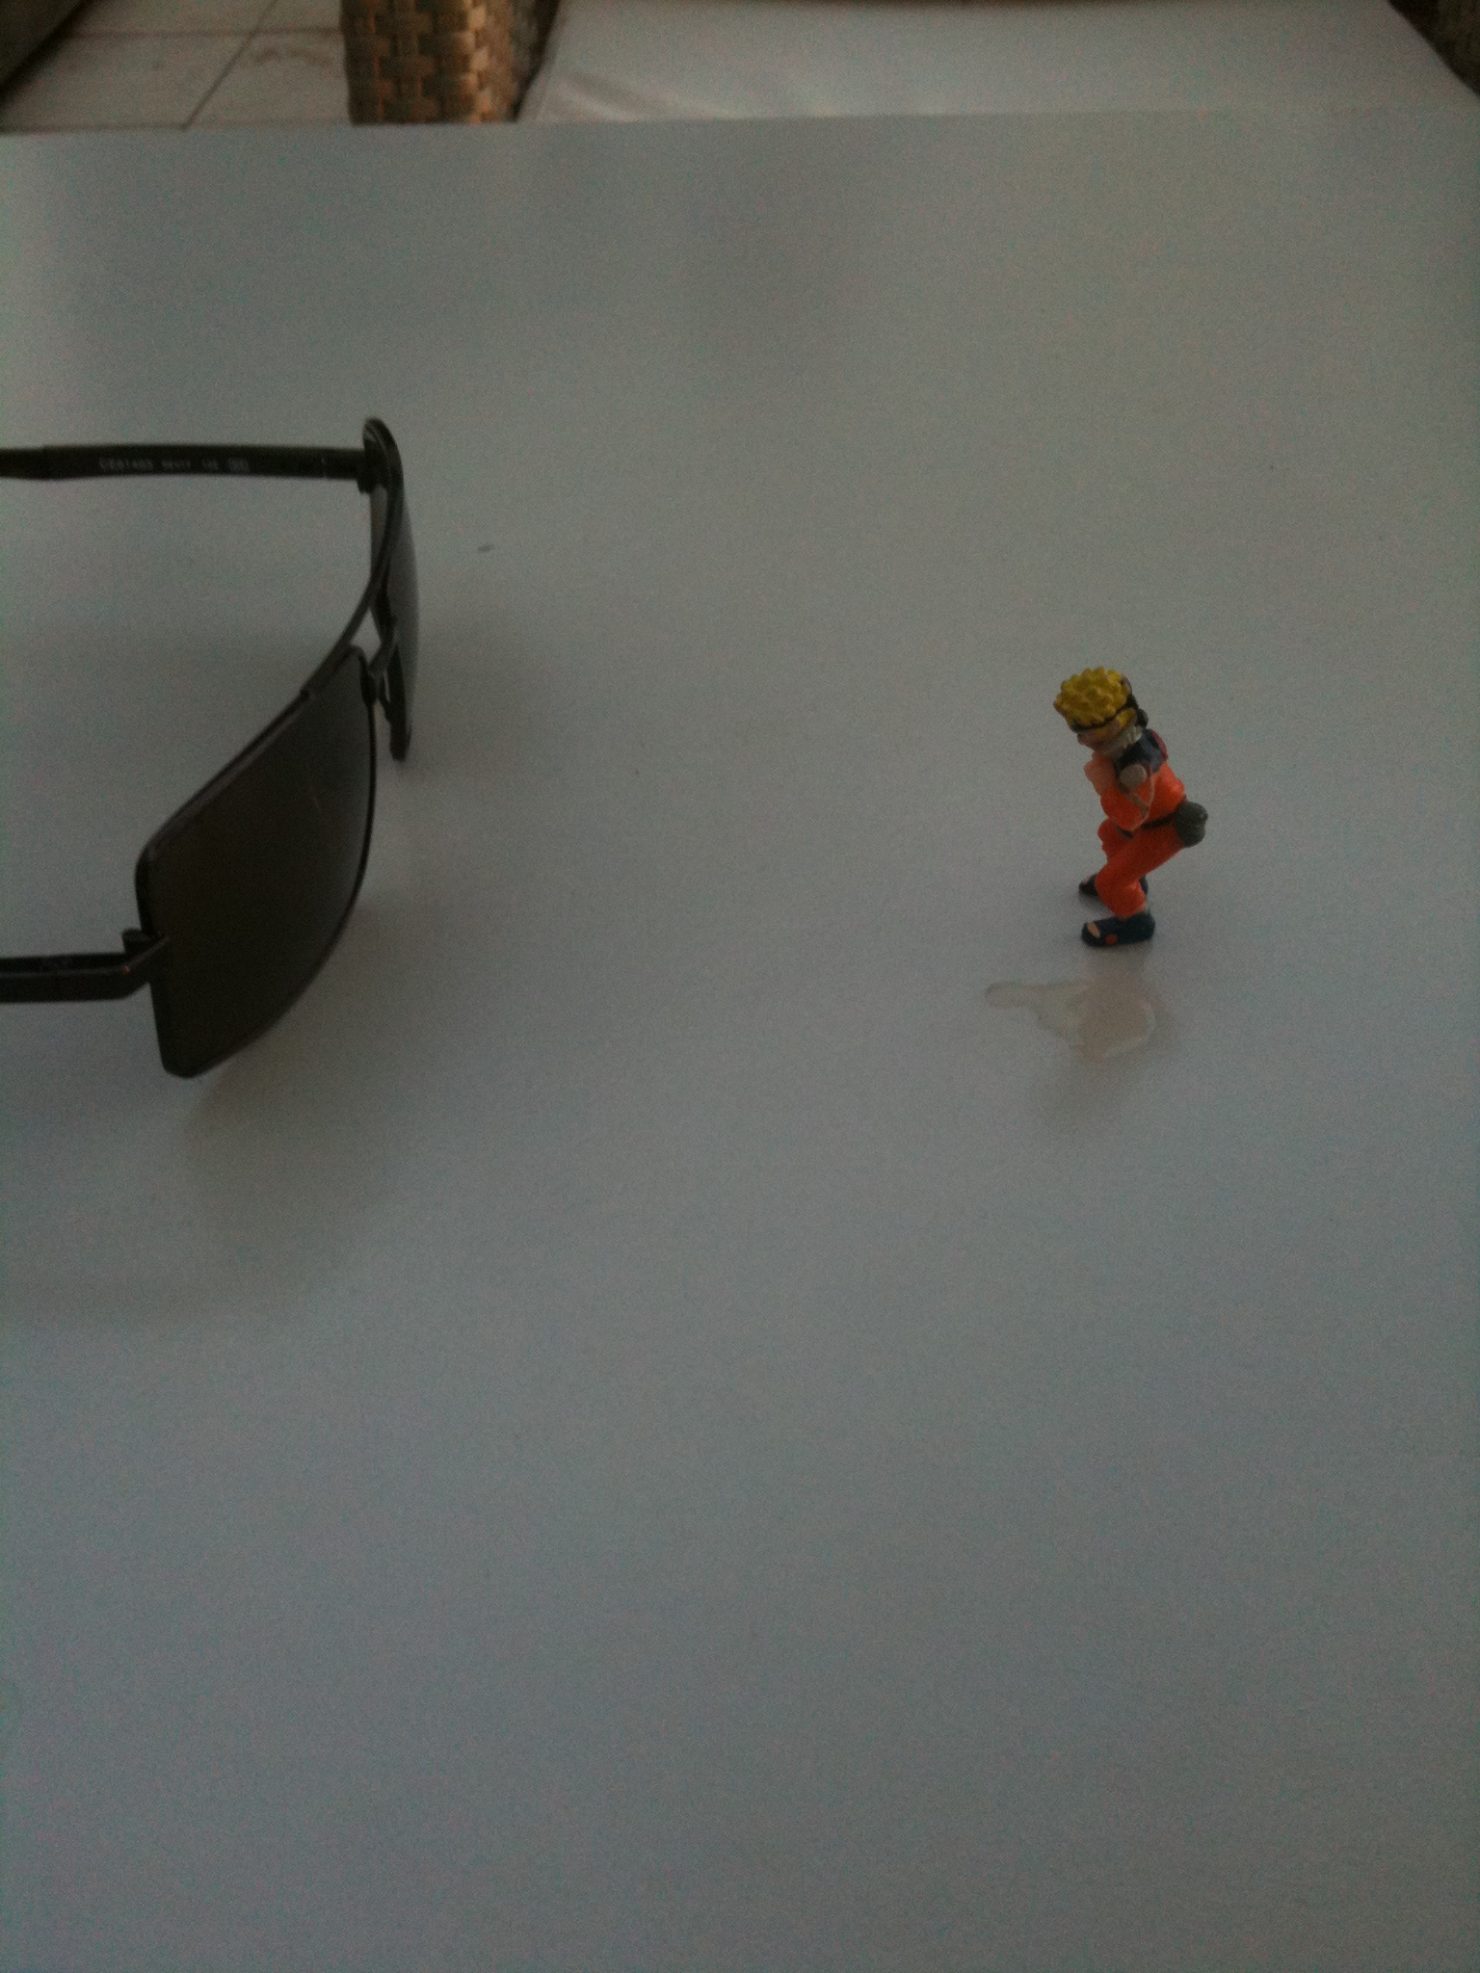 Naruto has a stare off against the sunglasses